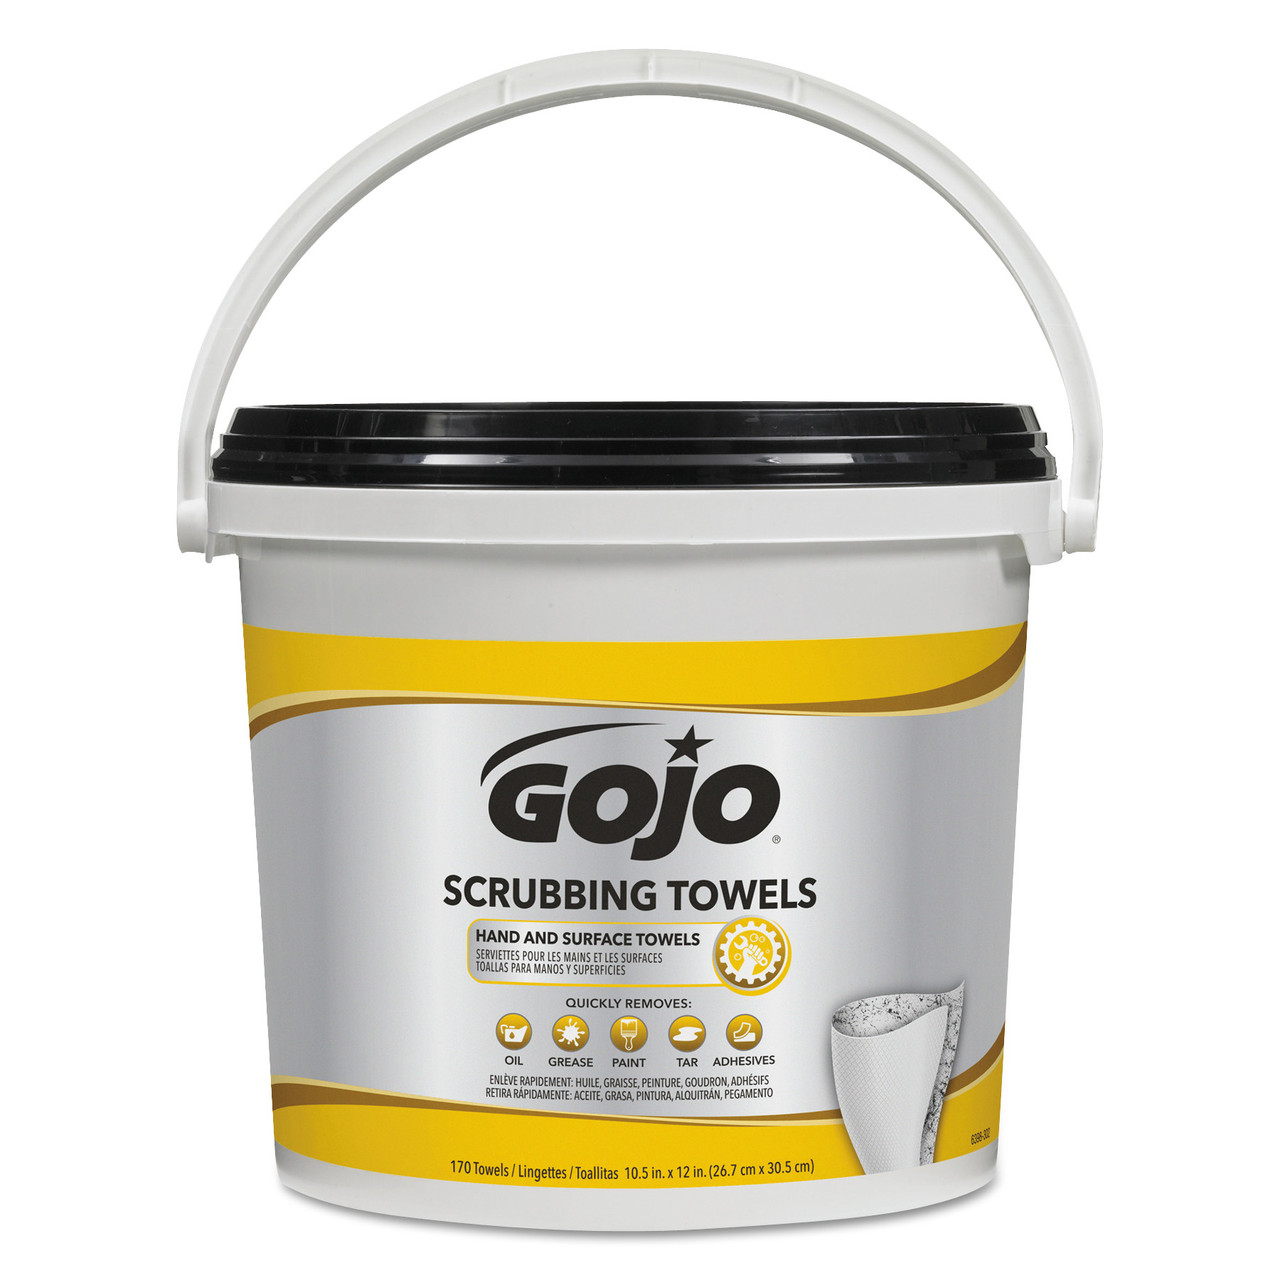 Gojo Fast Towels Hand Cleaning Towels, 7.75 x 11, 130-bucket, 4 Buckets-carton